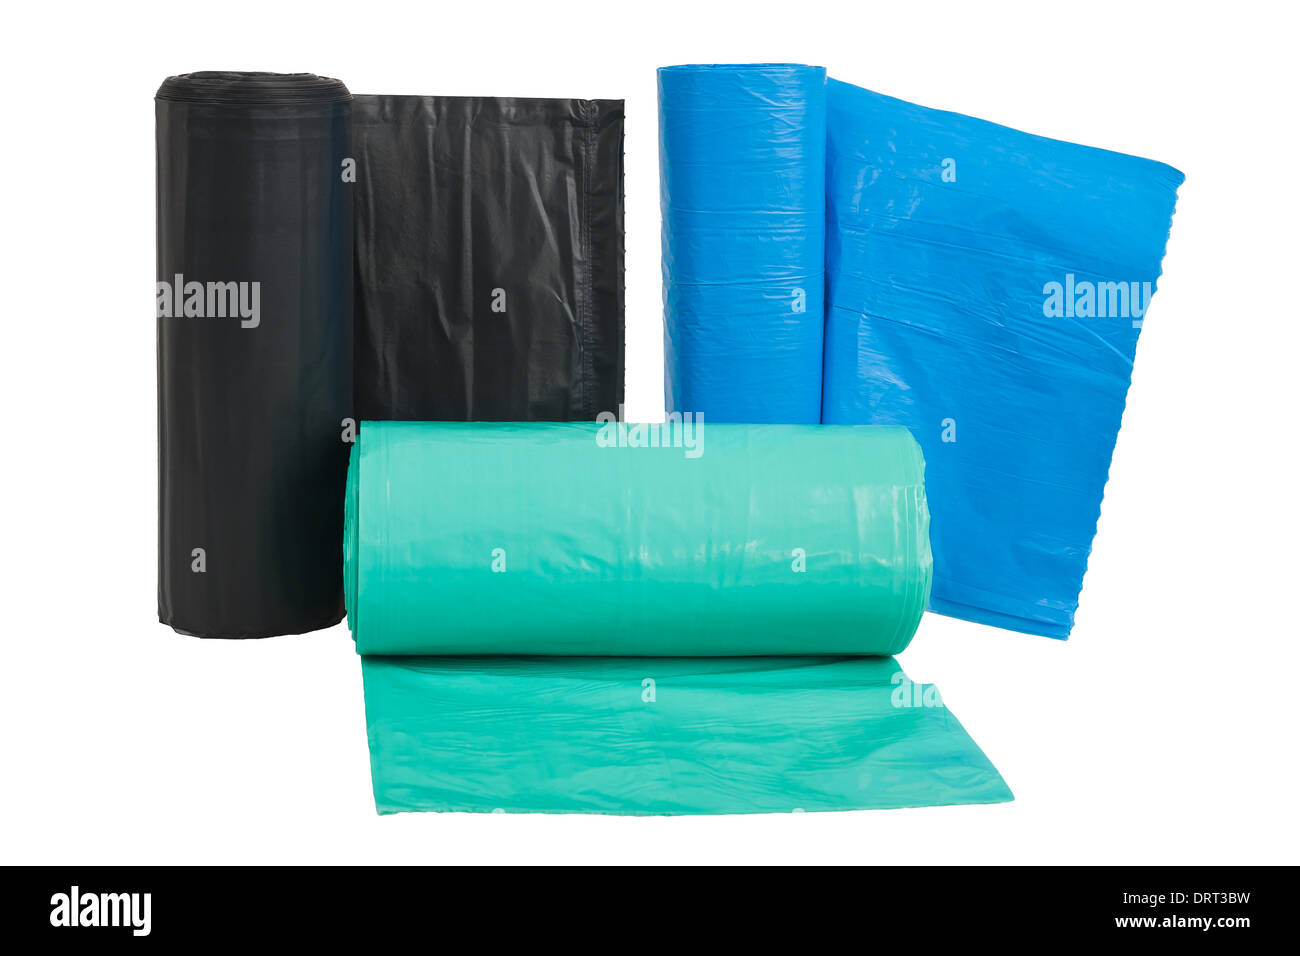 https://c8.alamy.com/comp/DRT3BW/rolls-of-disposable-trash-bags-isolated-on-white-background-DRT3BW.jpg